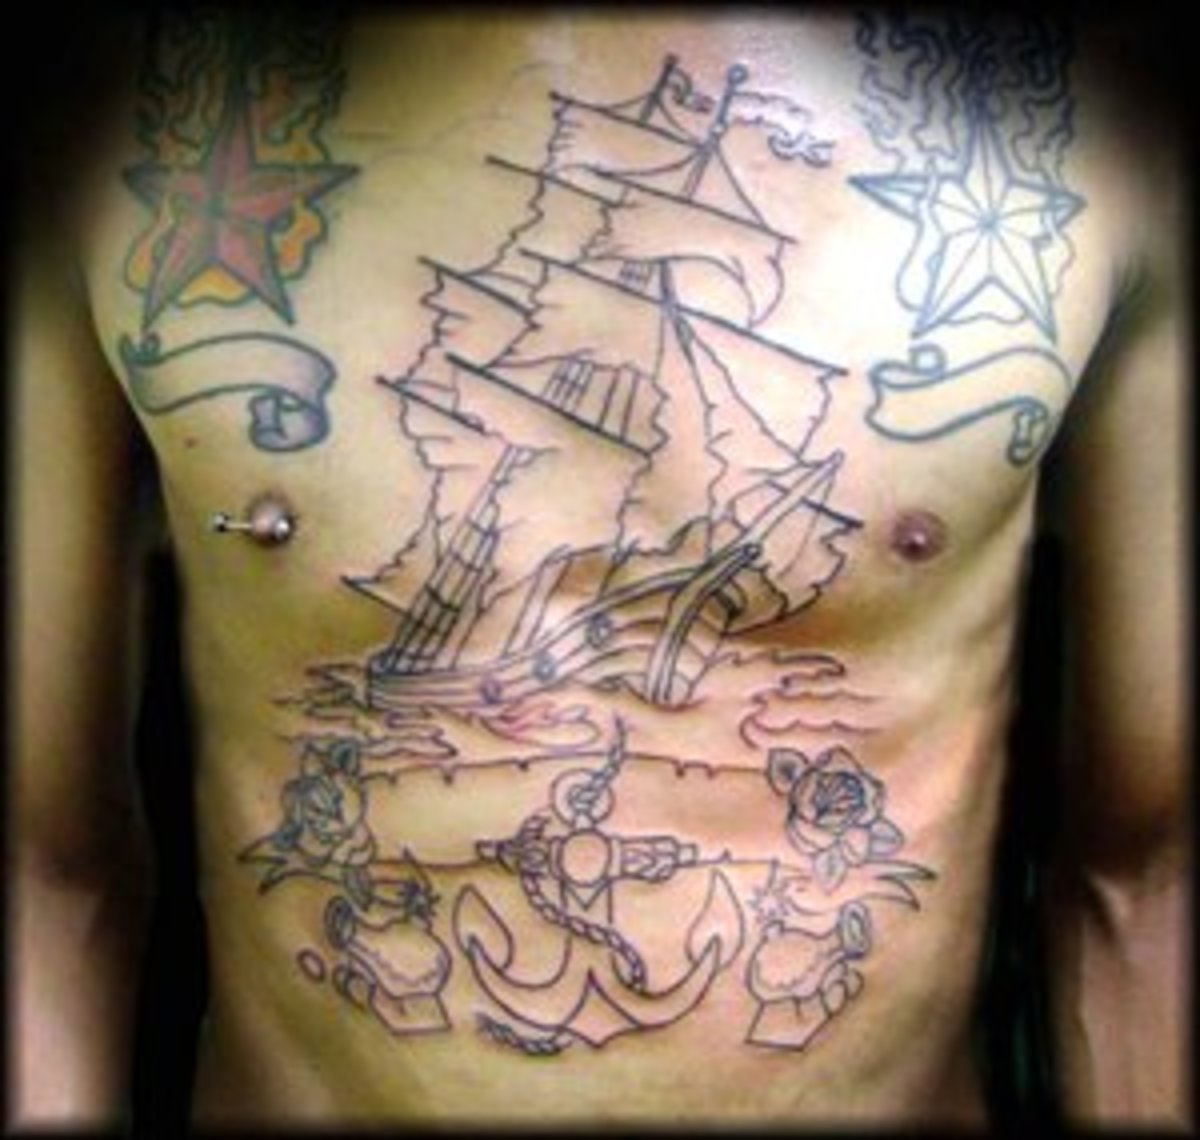 Outline of a pirate ship tat